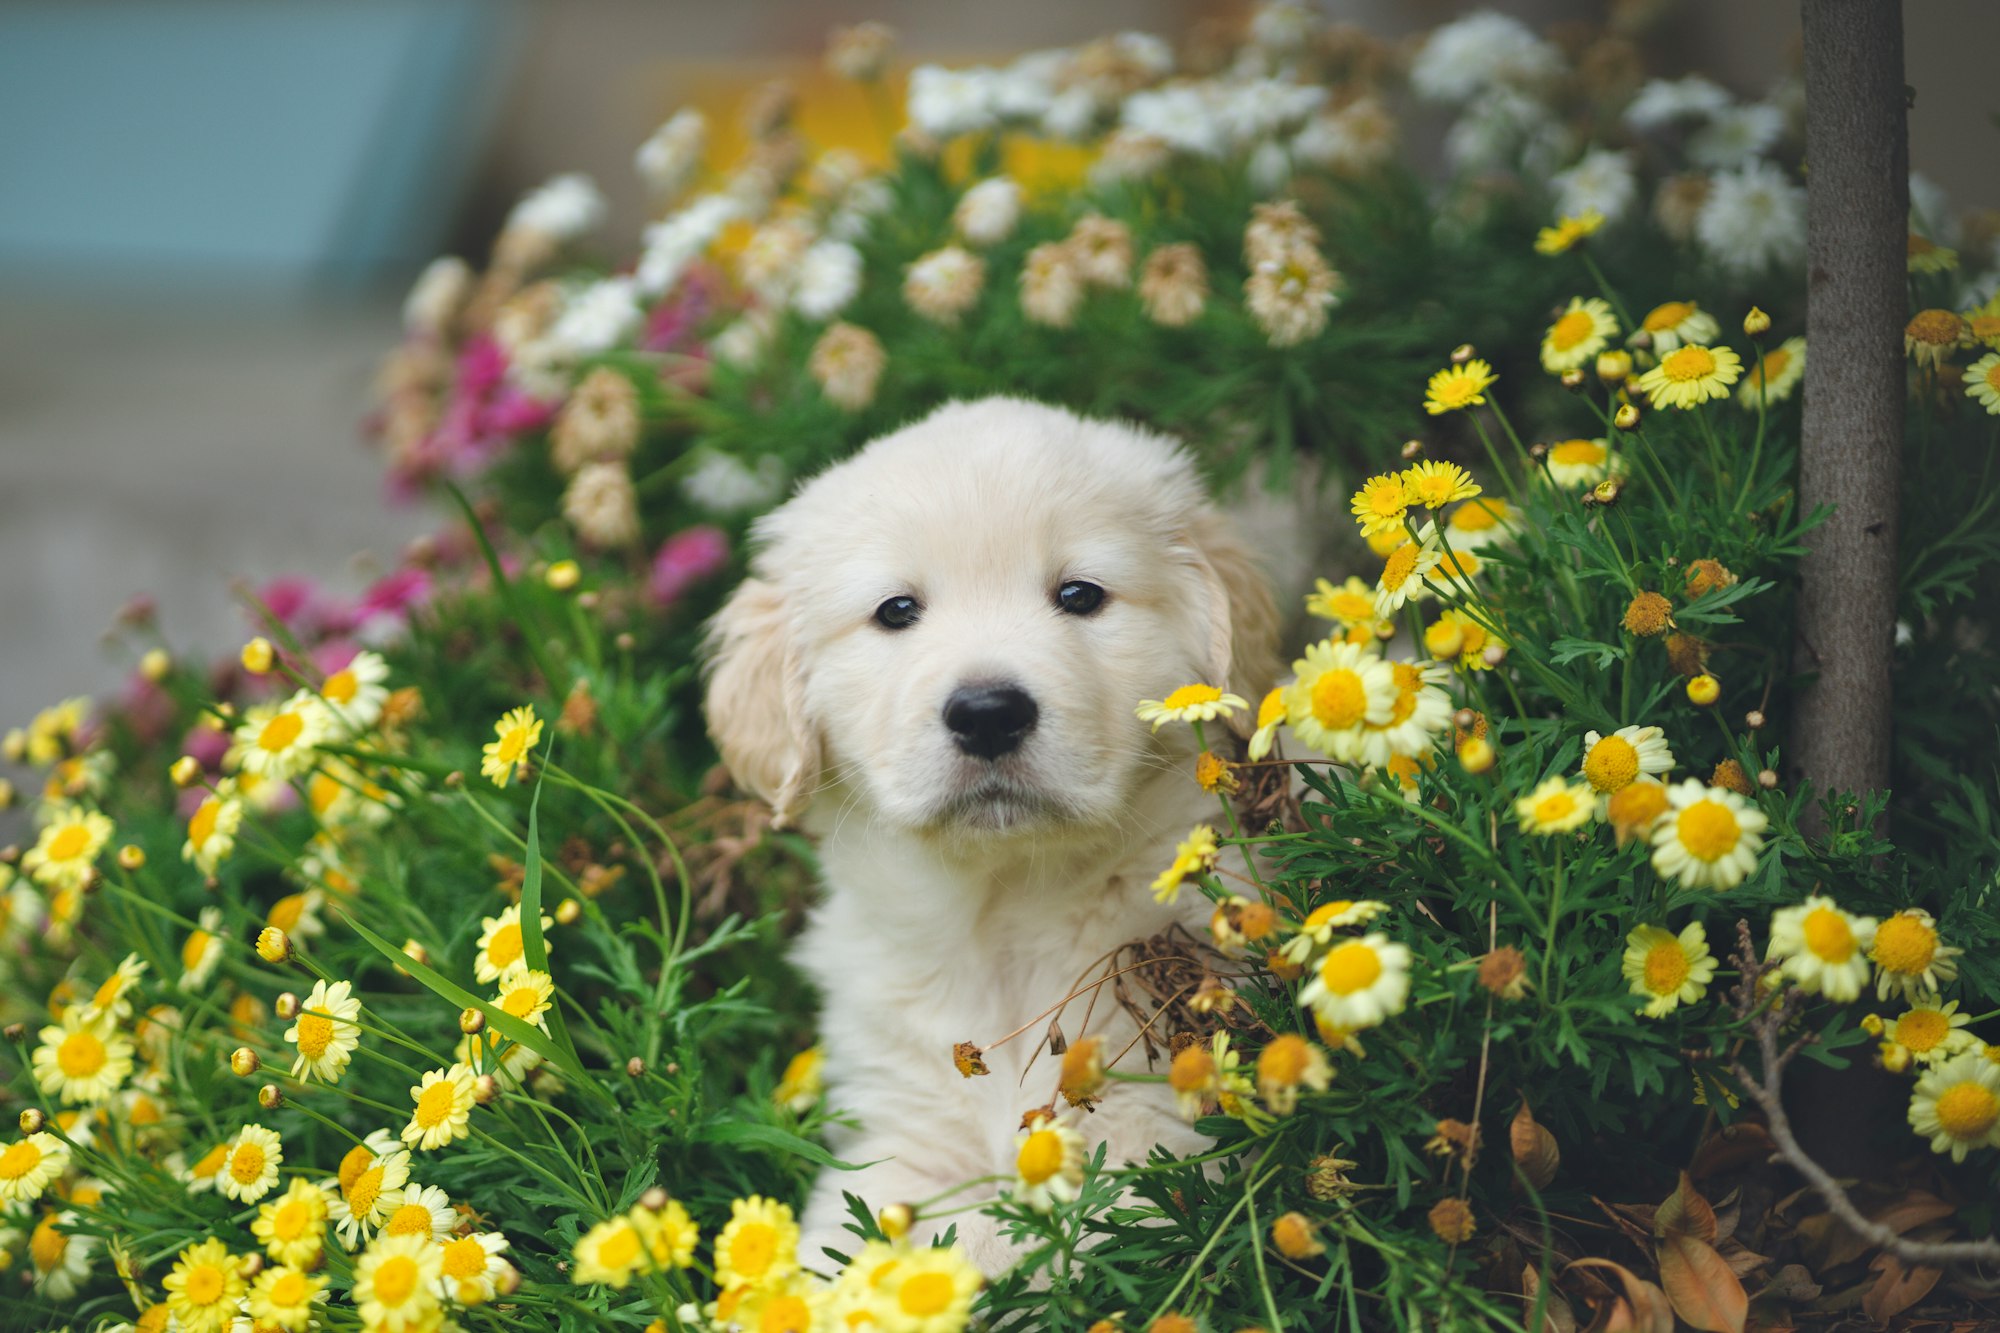 Pup in the flowers.